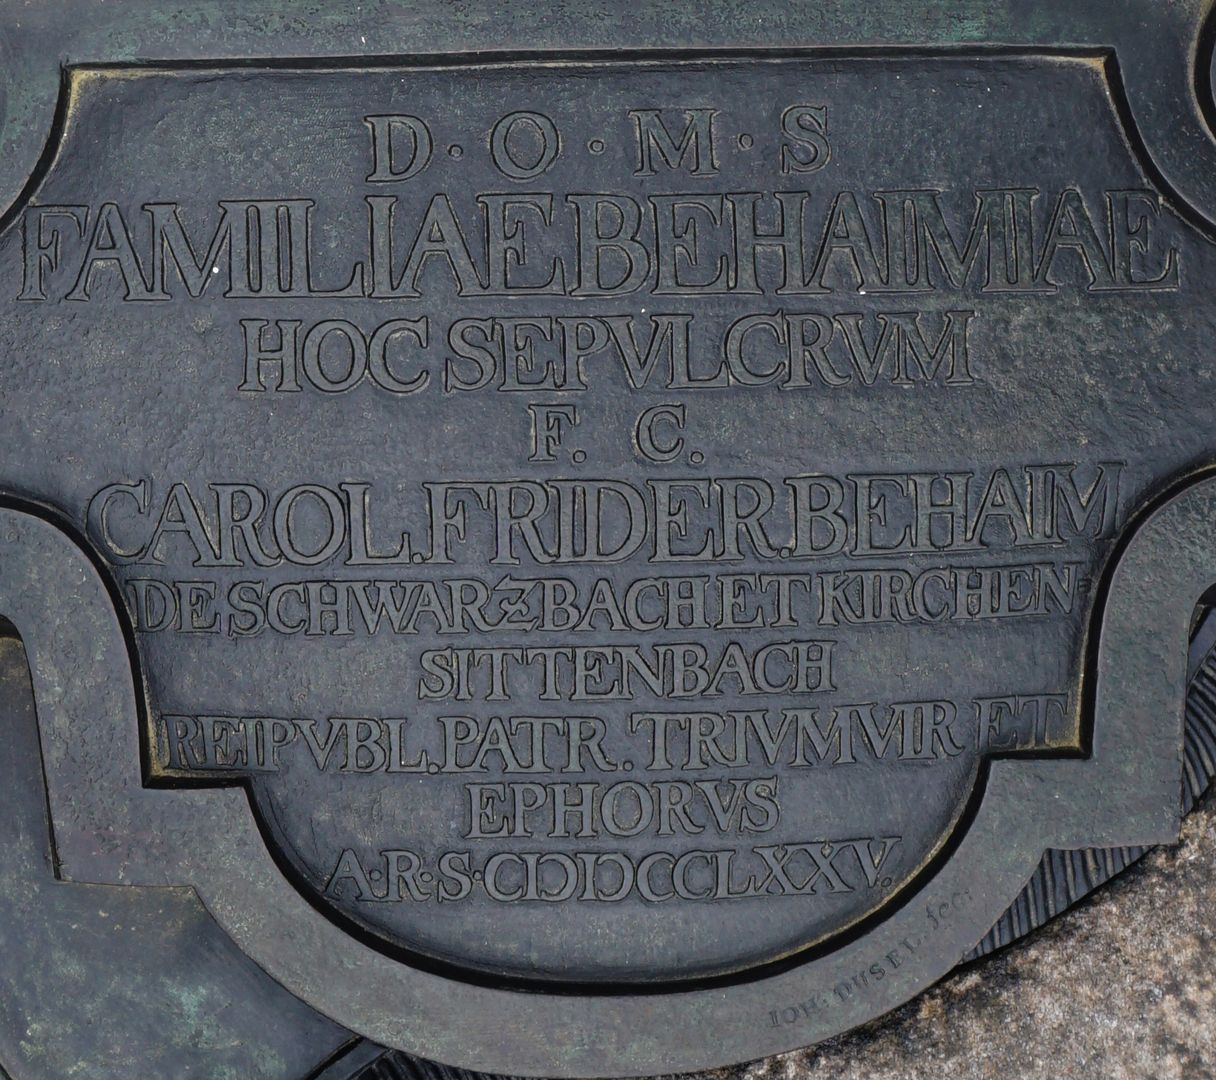 Gravesite of Carl Friedrich Behaim D.O.M.S. = Deo Optimo Maximo Sacrum ("Dedicated to the best and greatest God") / Hoc Sepulcrum (This Grave)